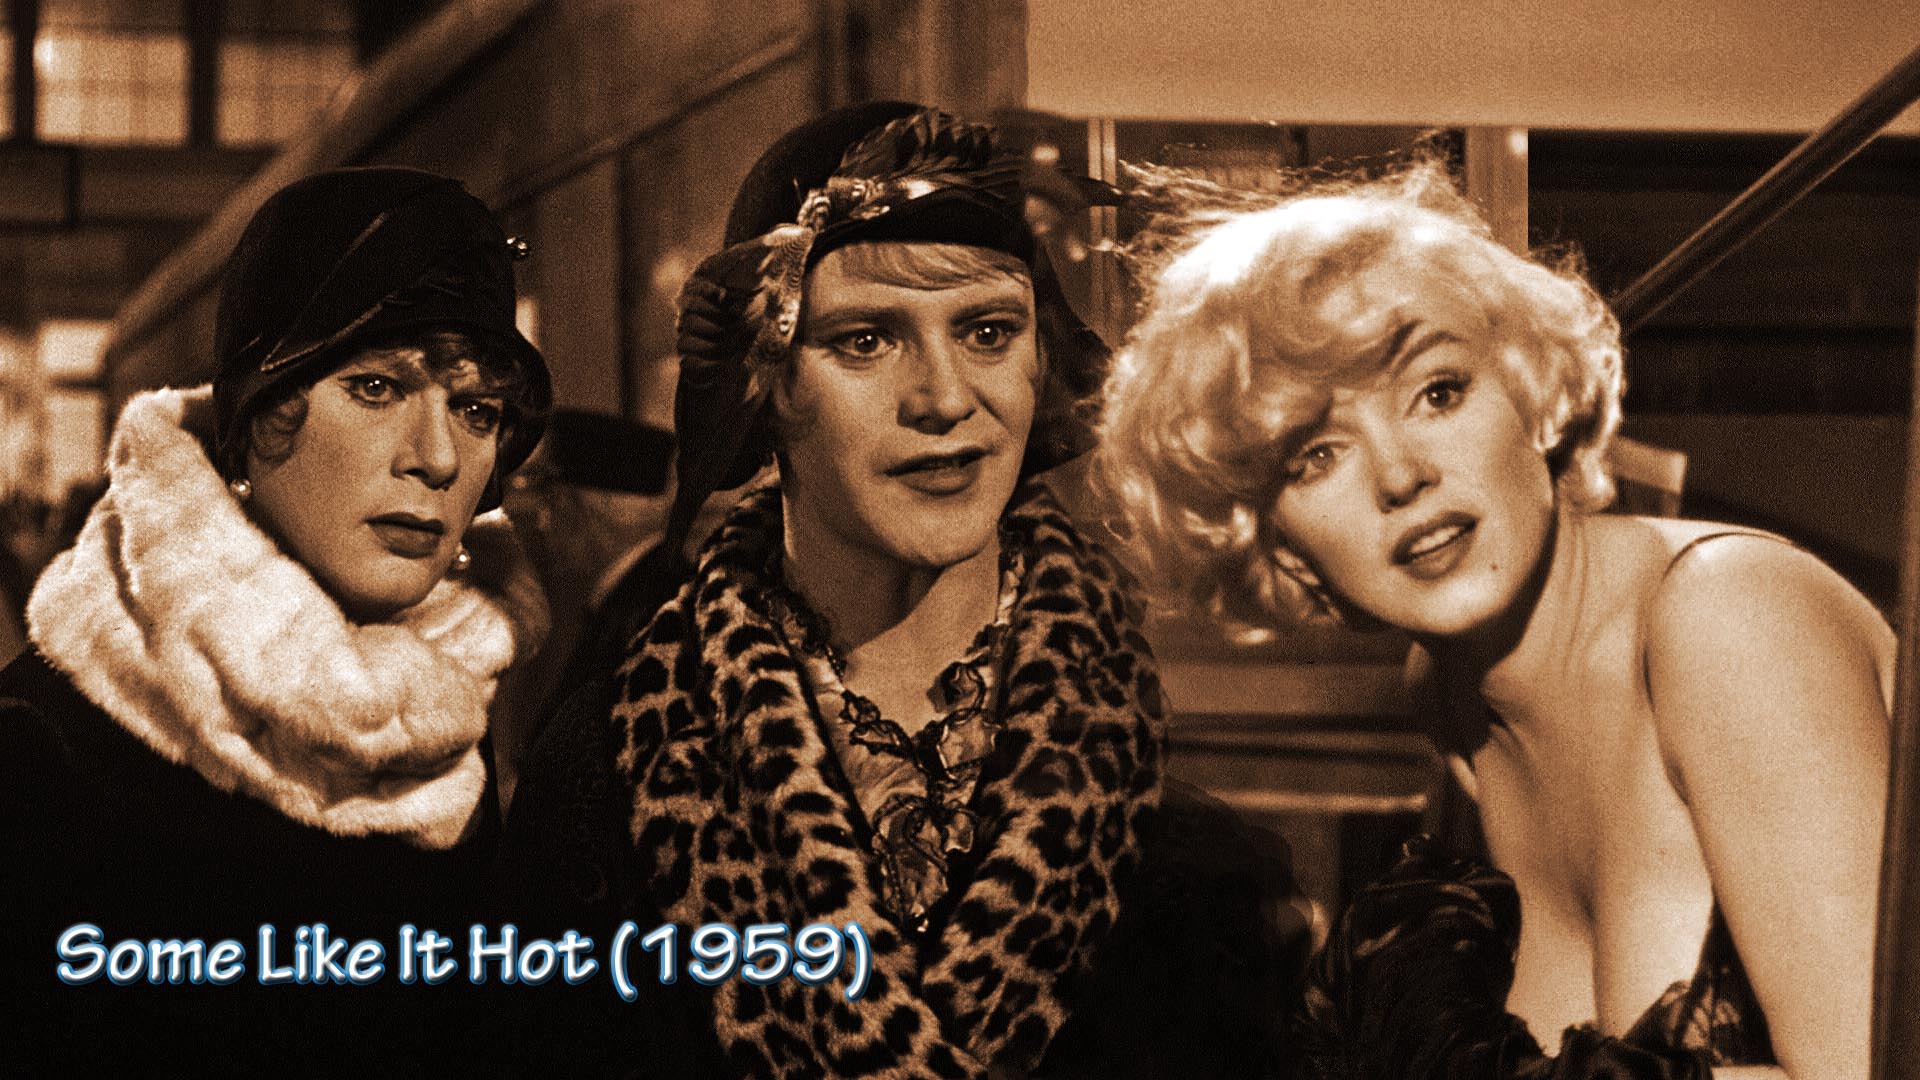 Classic movies wallpaper some like it hot some like it hot peliculas clasicas tony curtis